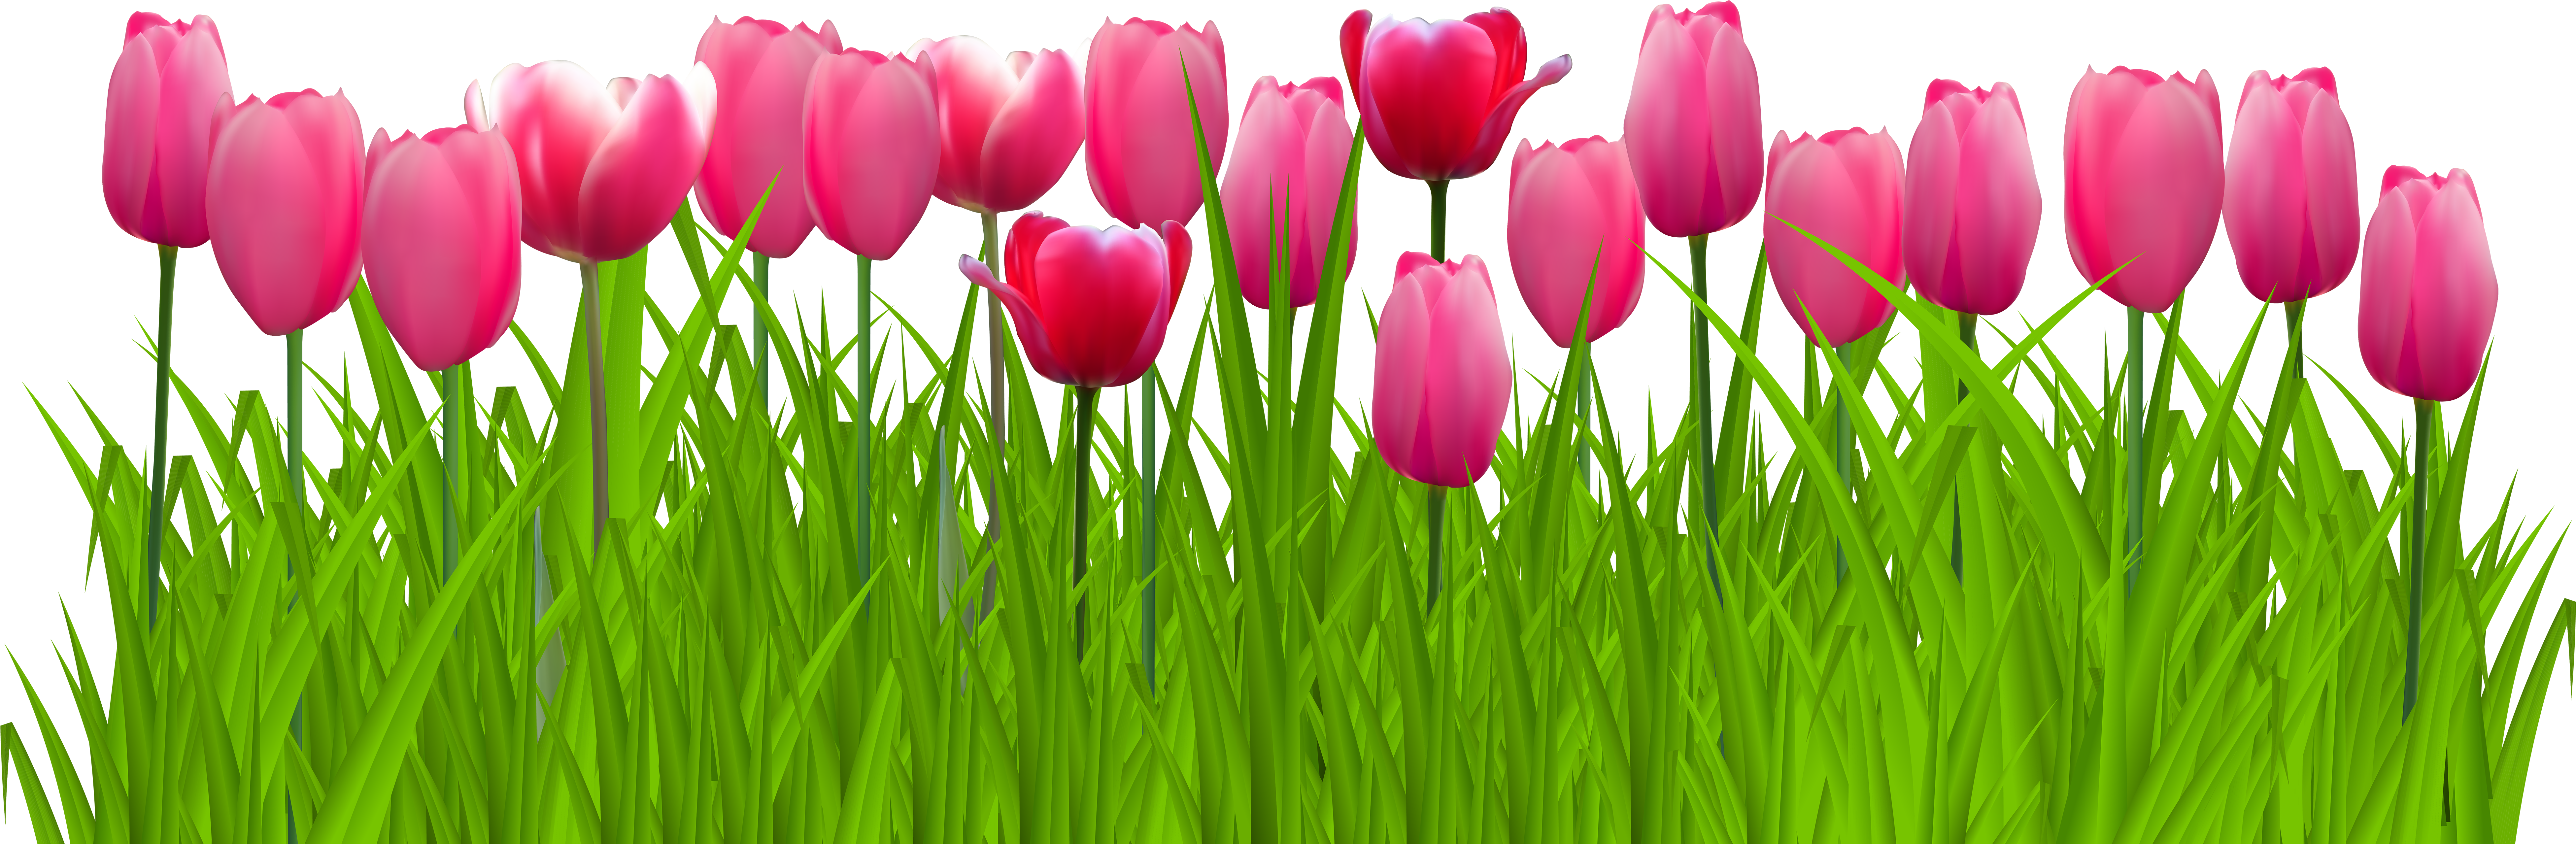 Vibrant Pink Tulips Row PNG